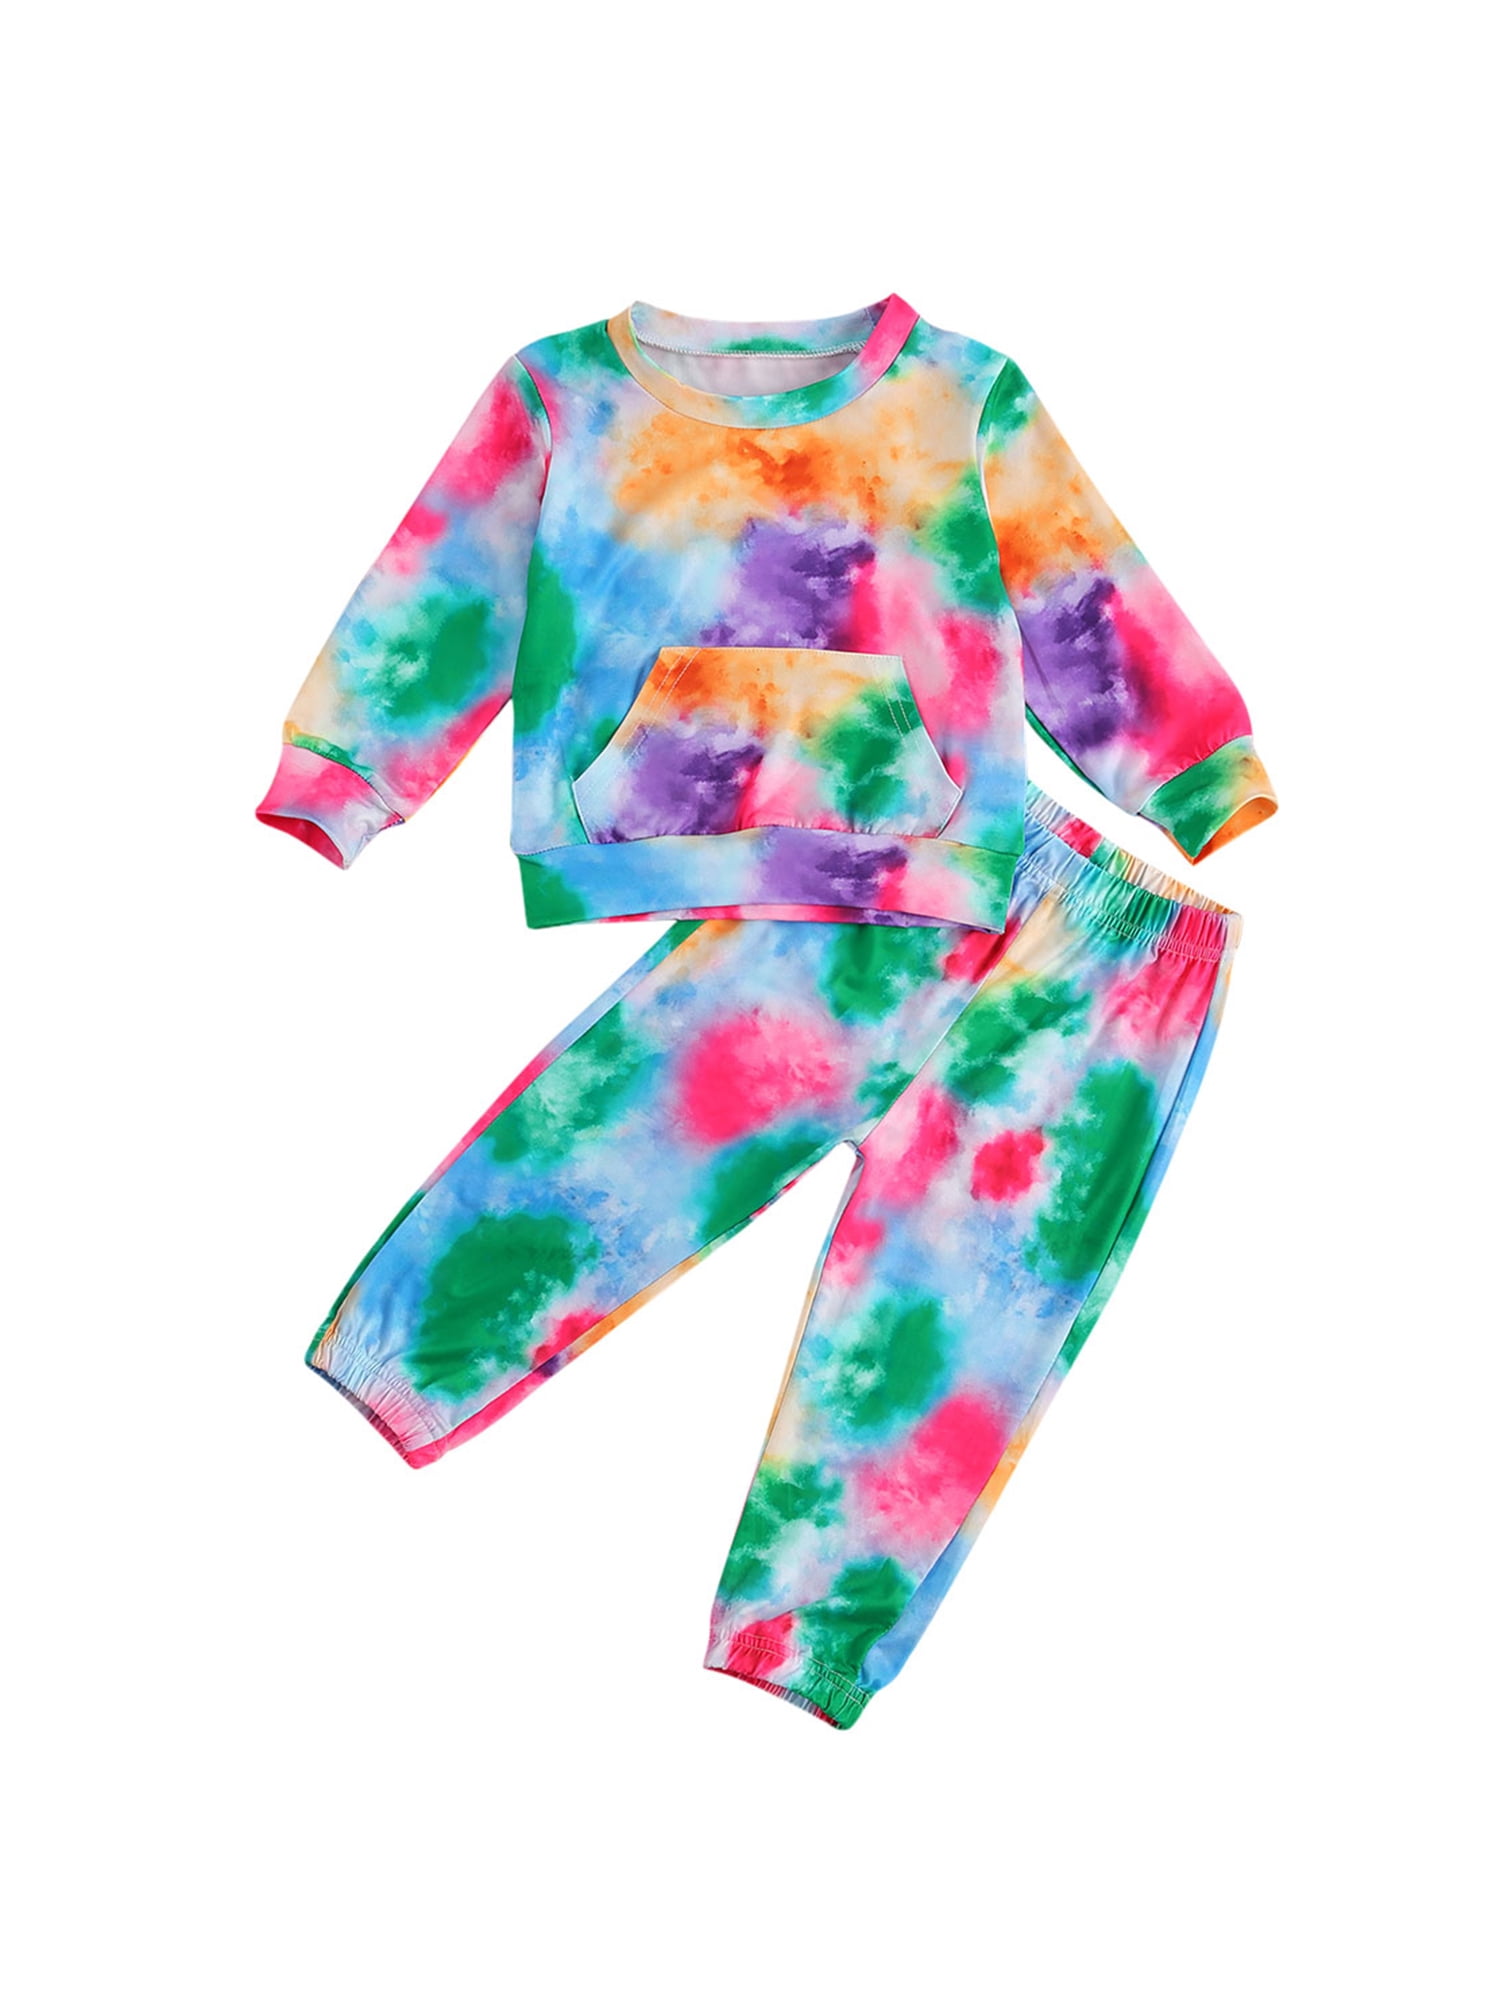 Baby Girl Tie Dye Clothes Girls Tracksuit Outfits Long Sleeve Hoodie Sweatshirt Trousers Pants Set Autumn for 1-6Yrs 2pcs 